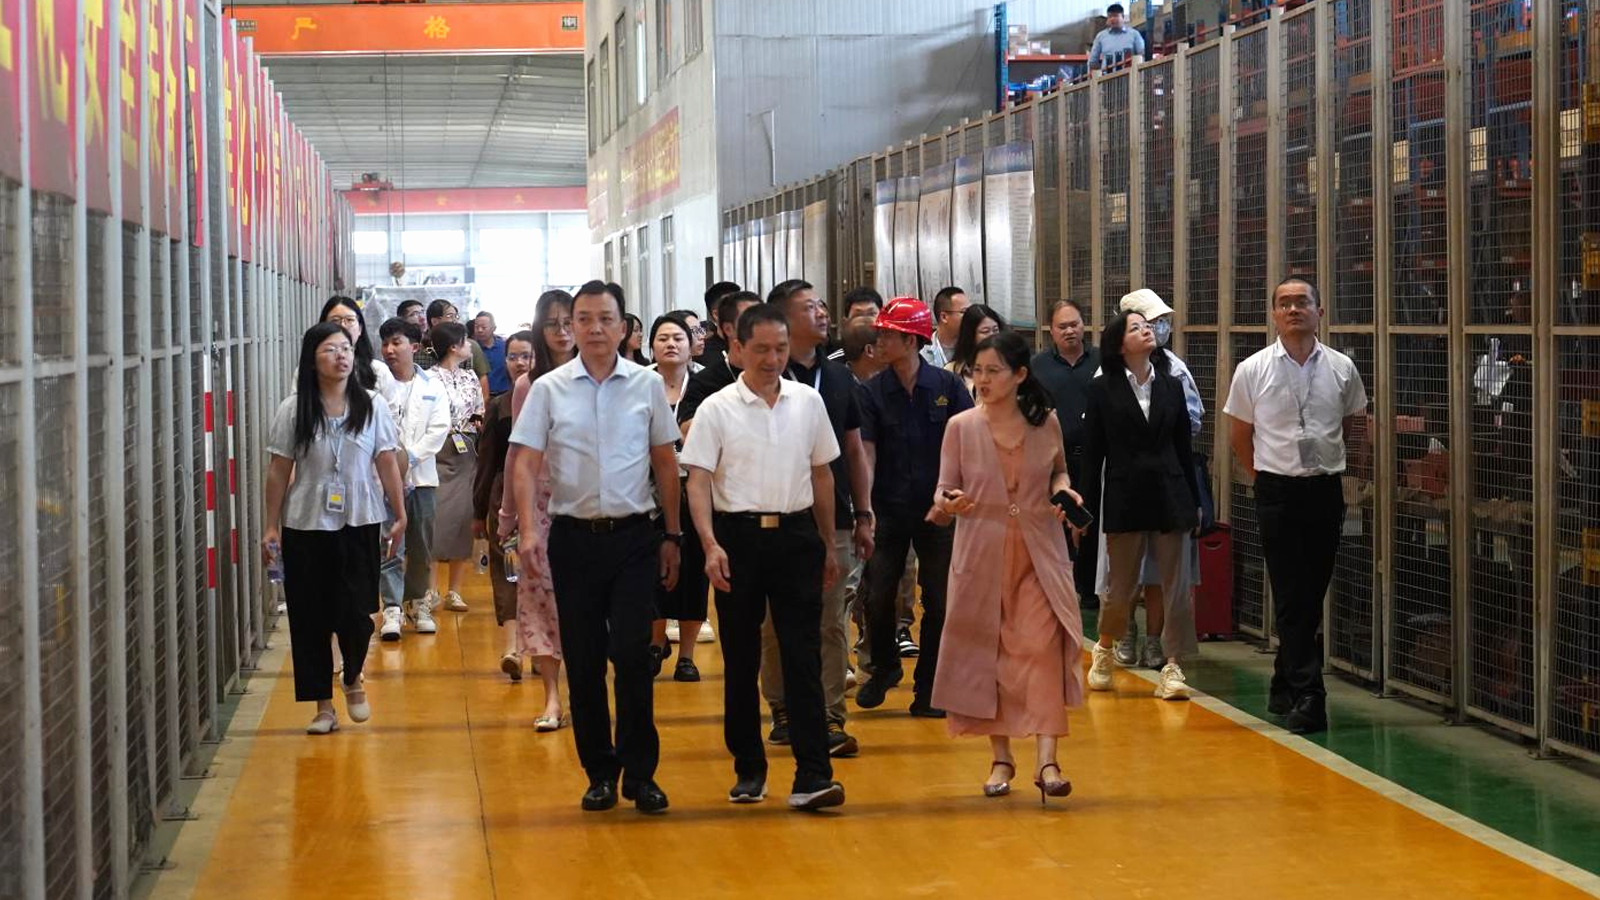 The Information Industry Trade Union Cadre Training Class From The Fujian Provincial Department of Industry And Information Technology Visits To Explore The Charm of Qunfeng's "intelligent Manufacturi